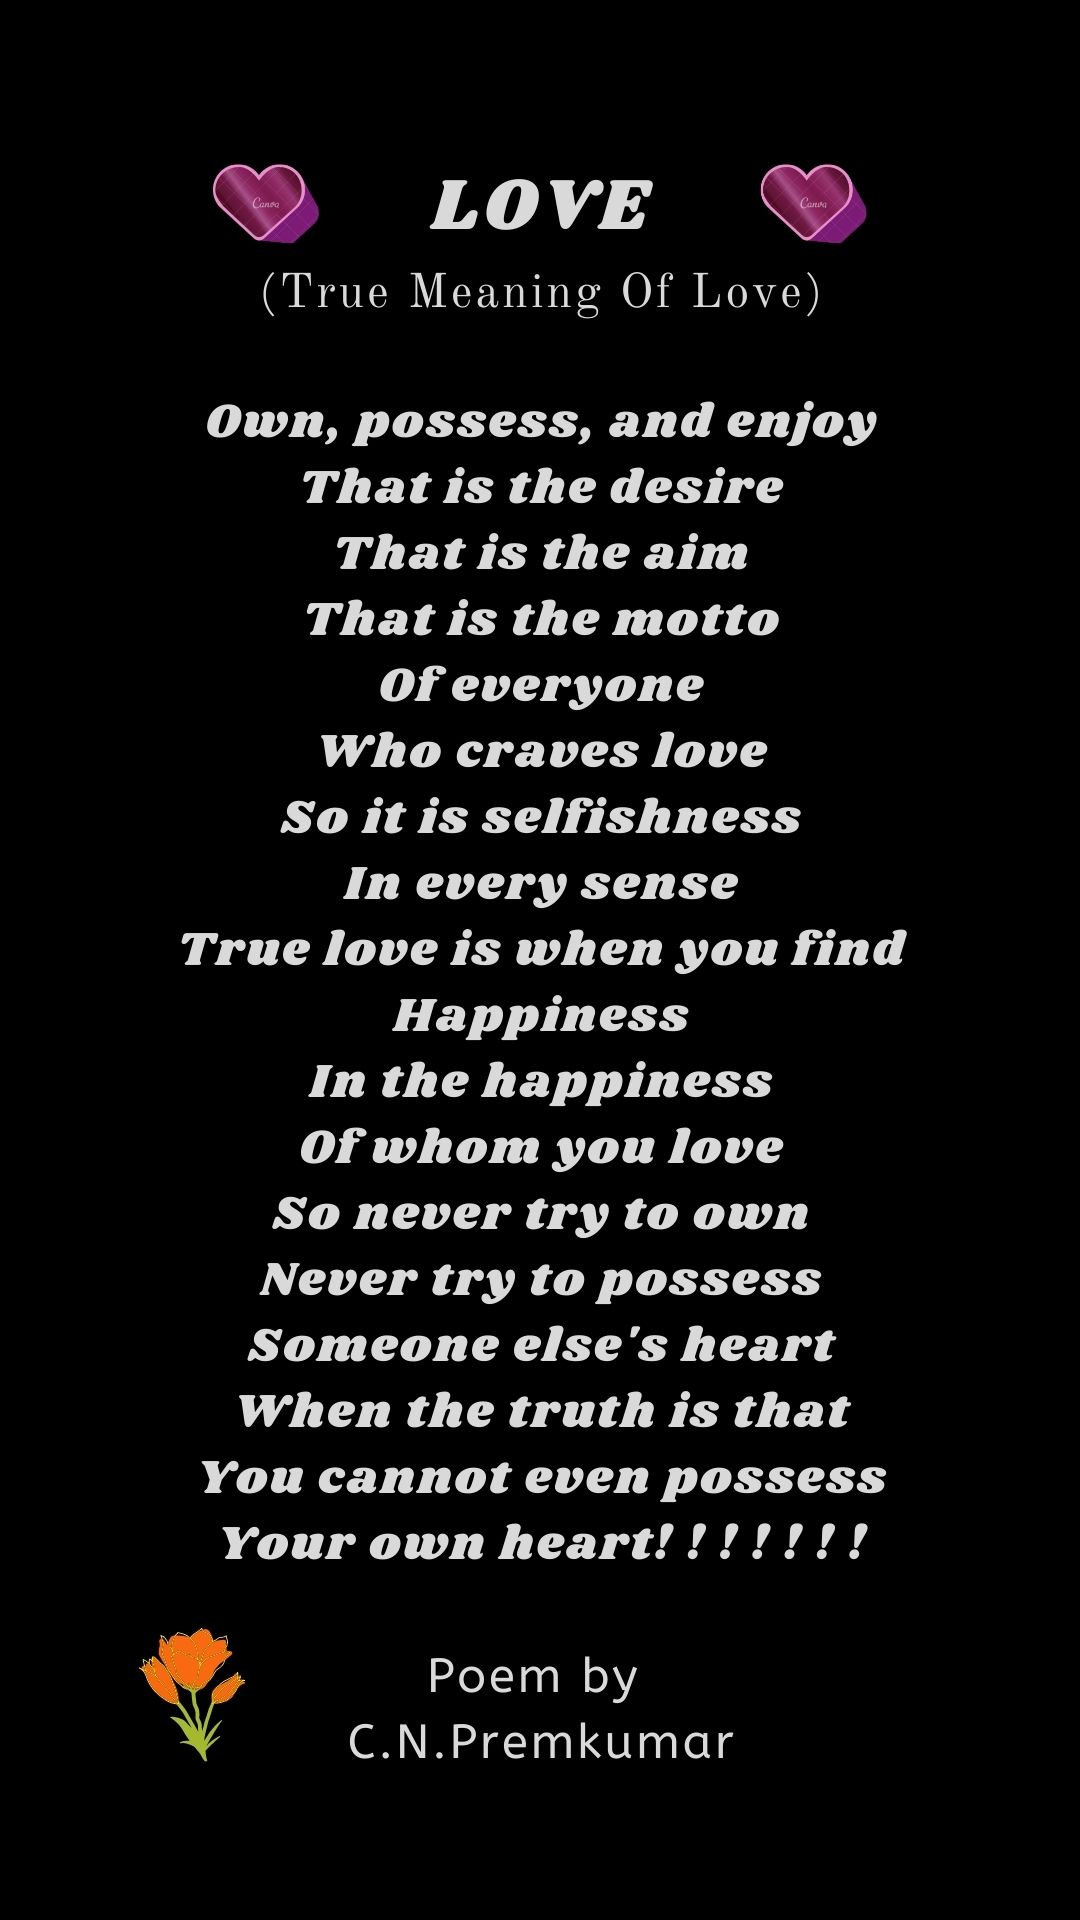 Love (True Meaning Of Love)